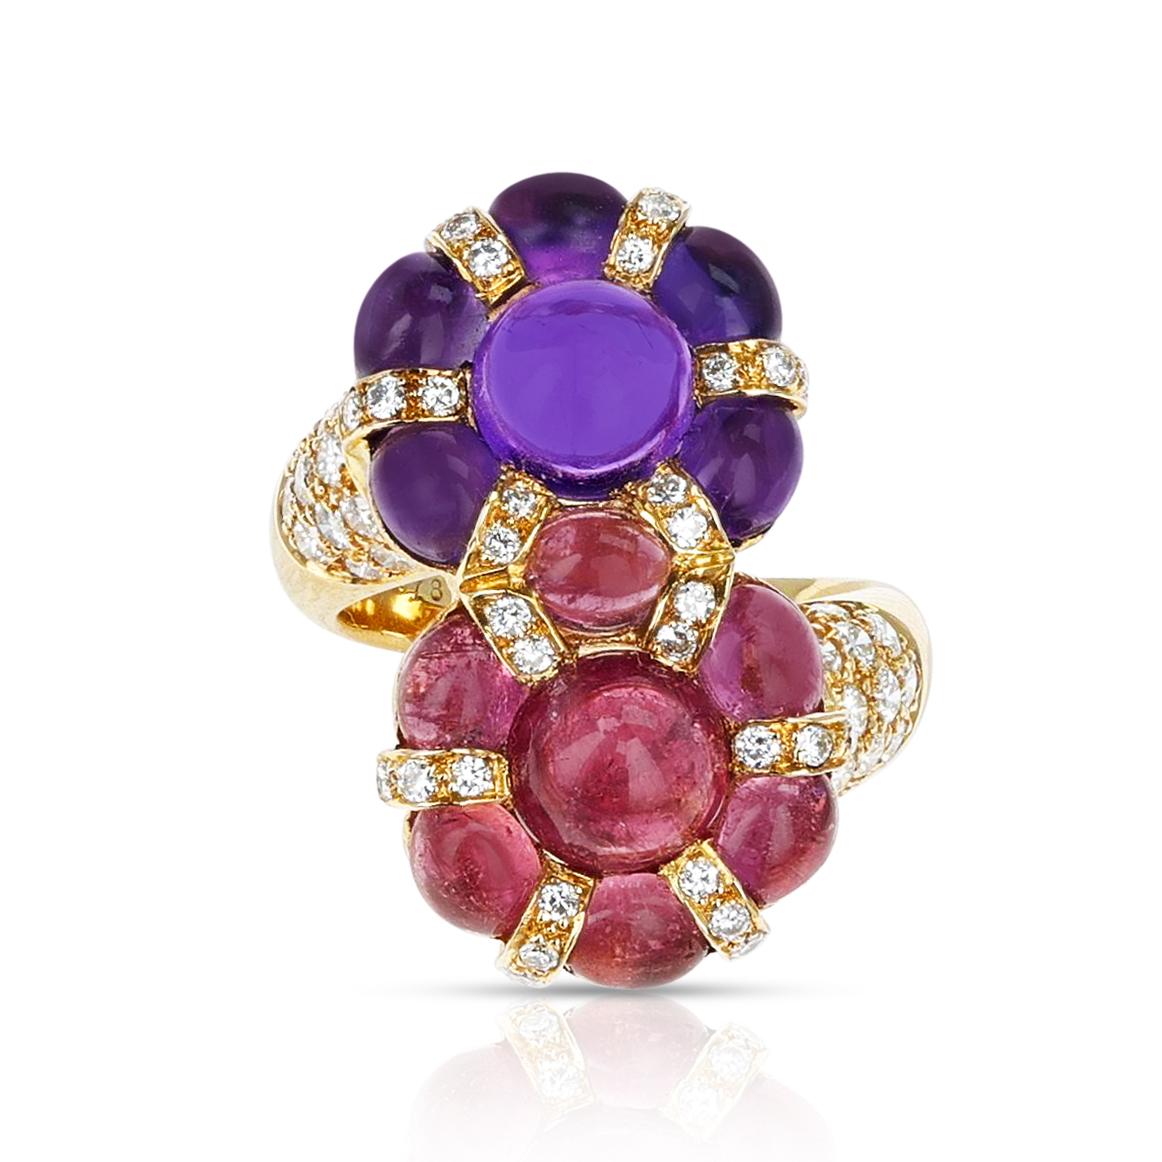 A Pink Tourmaline and Amethyst Cabochon Double Flower Ring with Diamonds made in 18 Karat Yellow Gold. The ring size is US 6.25 and the total weight of the ring is 11.65 grams. 